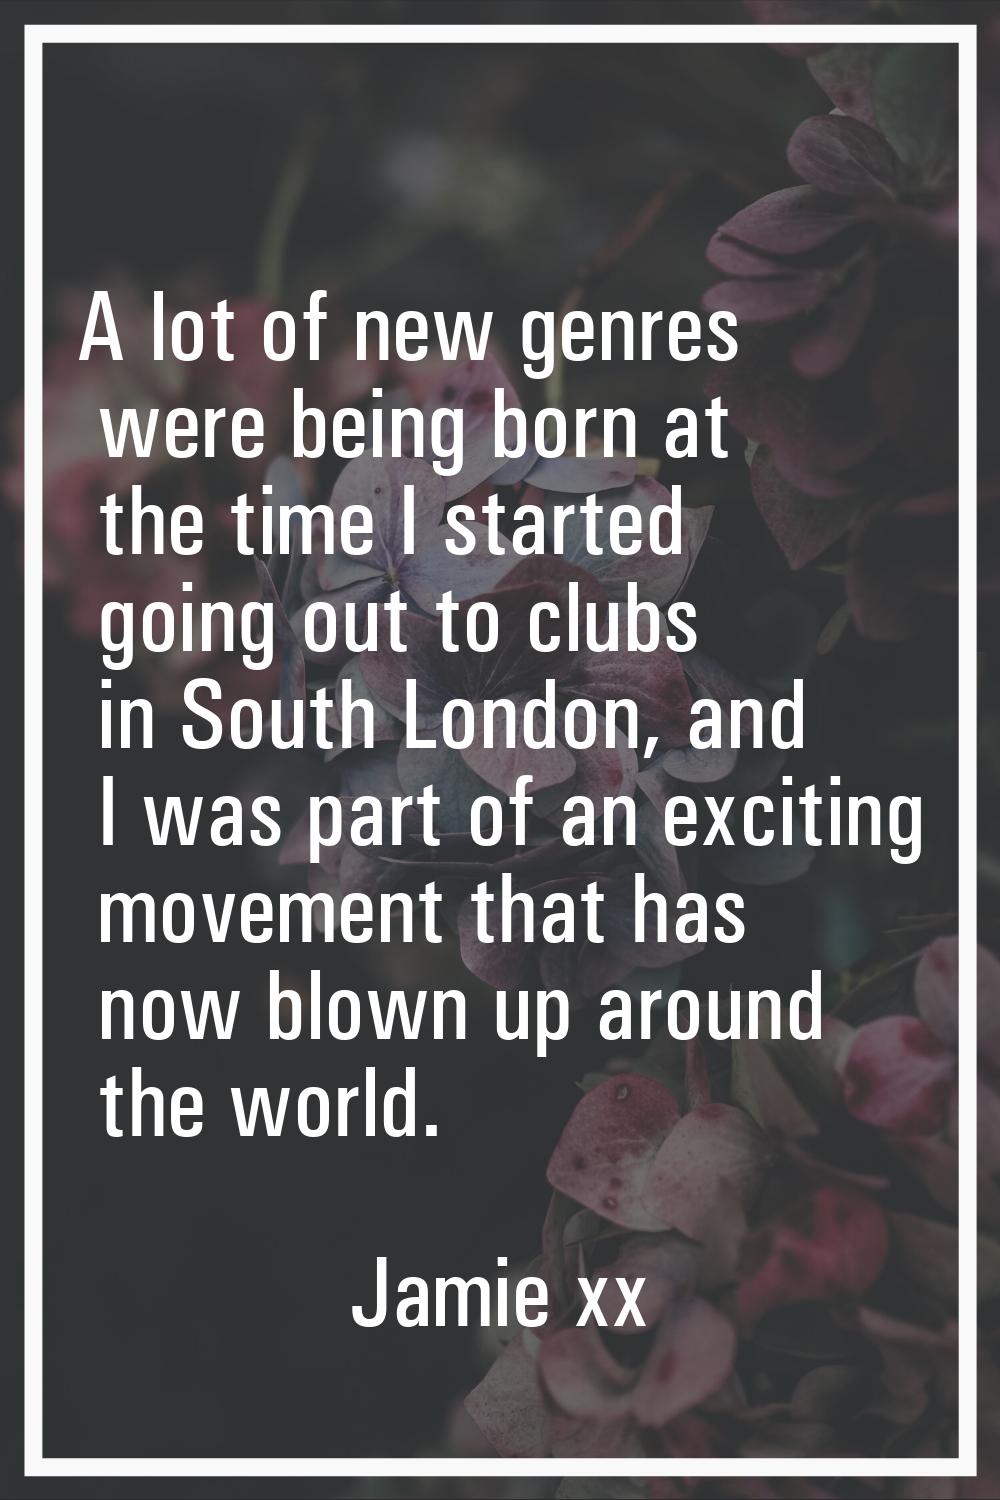 A lot of new genres were being born at the time I started going out to clubs in South London, and I